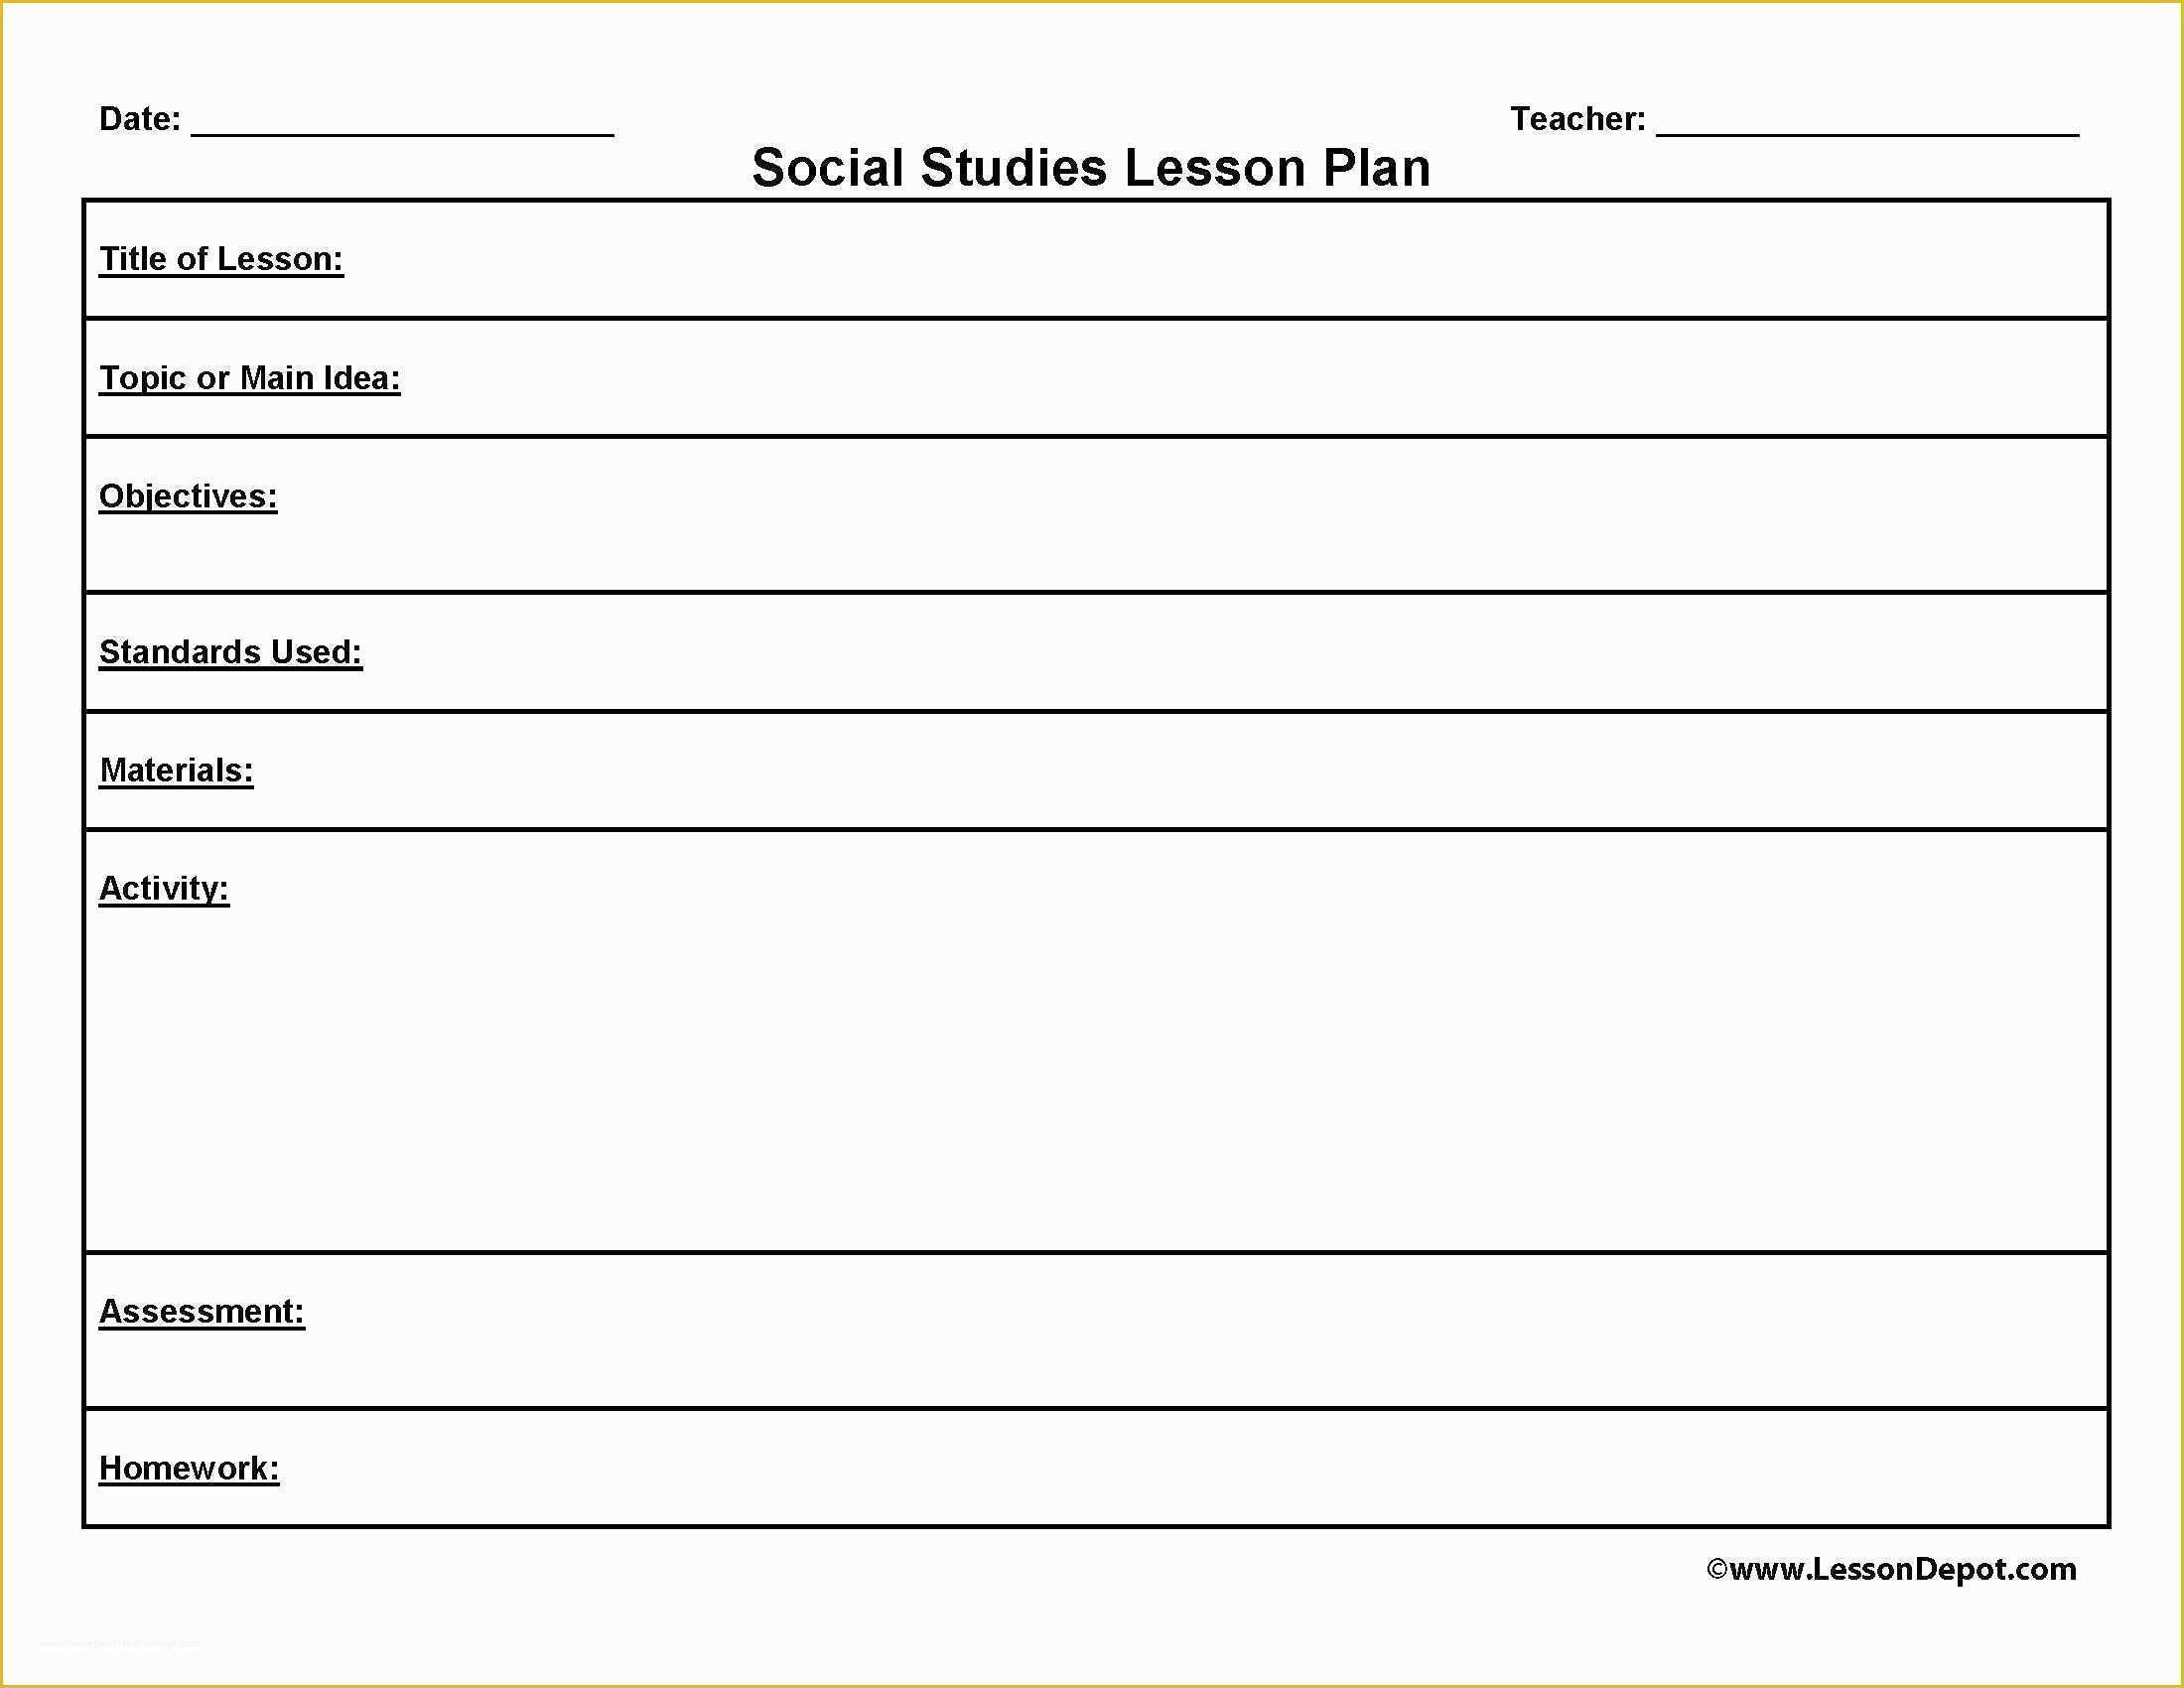 Free Lesson Plan Templates Of Printable Blank Lesson Plans form